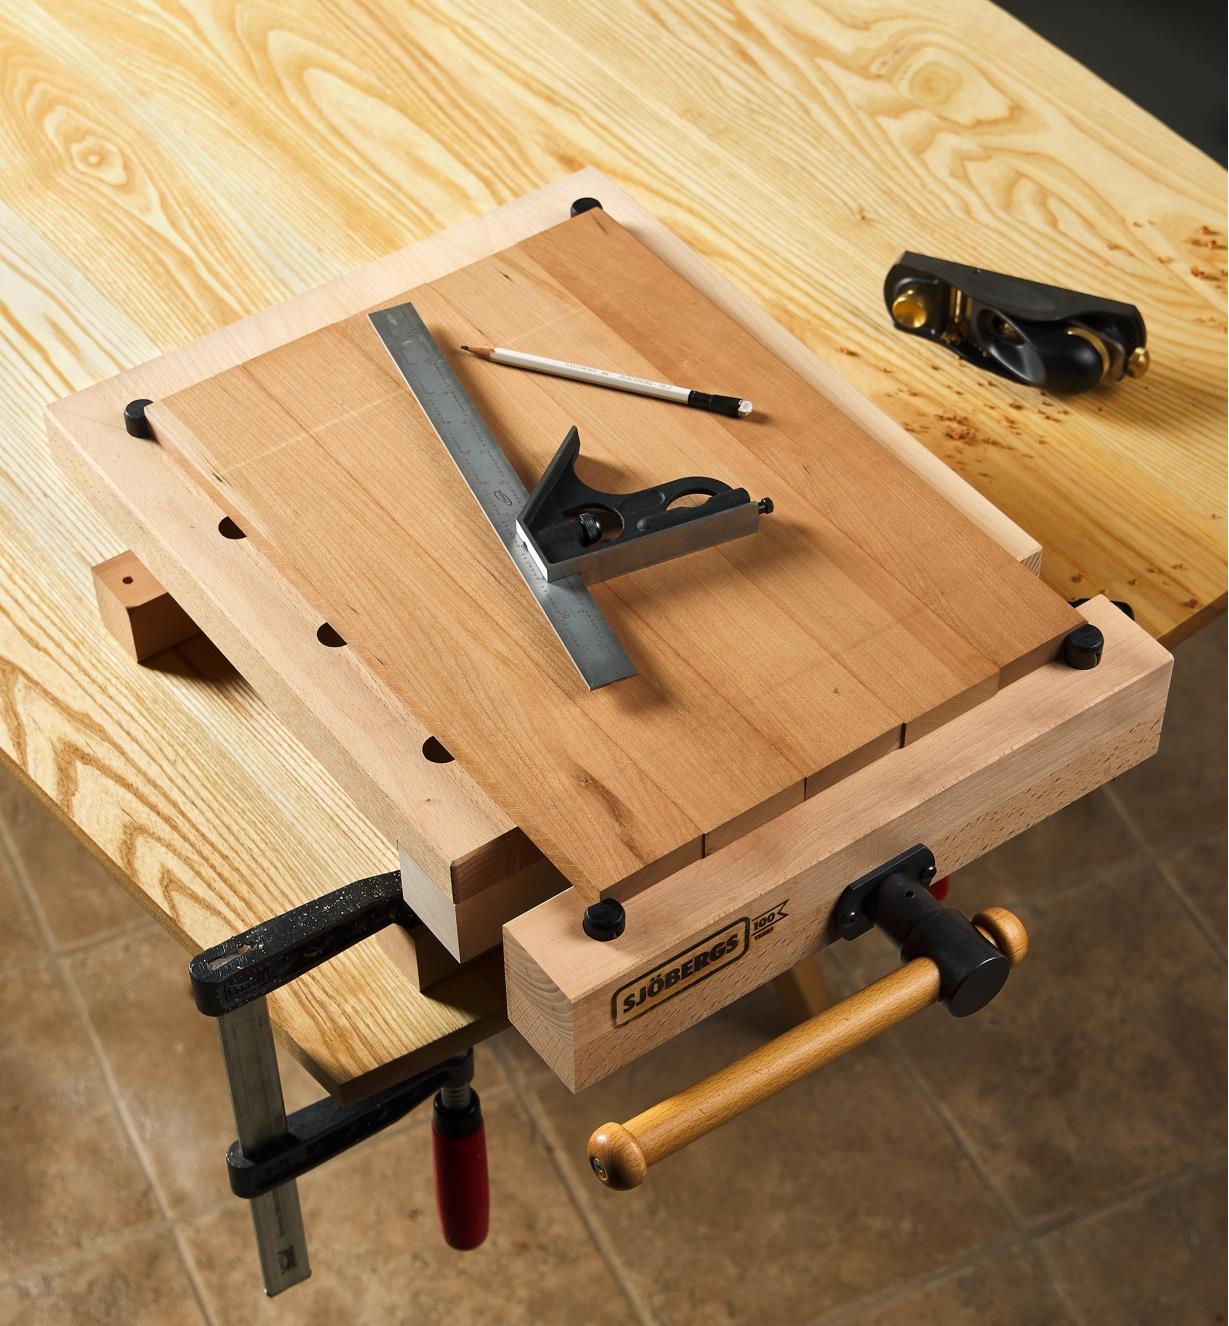 A workbench with a workstation clamped to it with a board and combination square